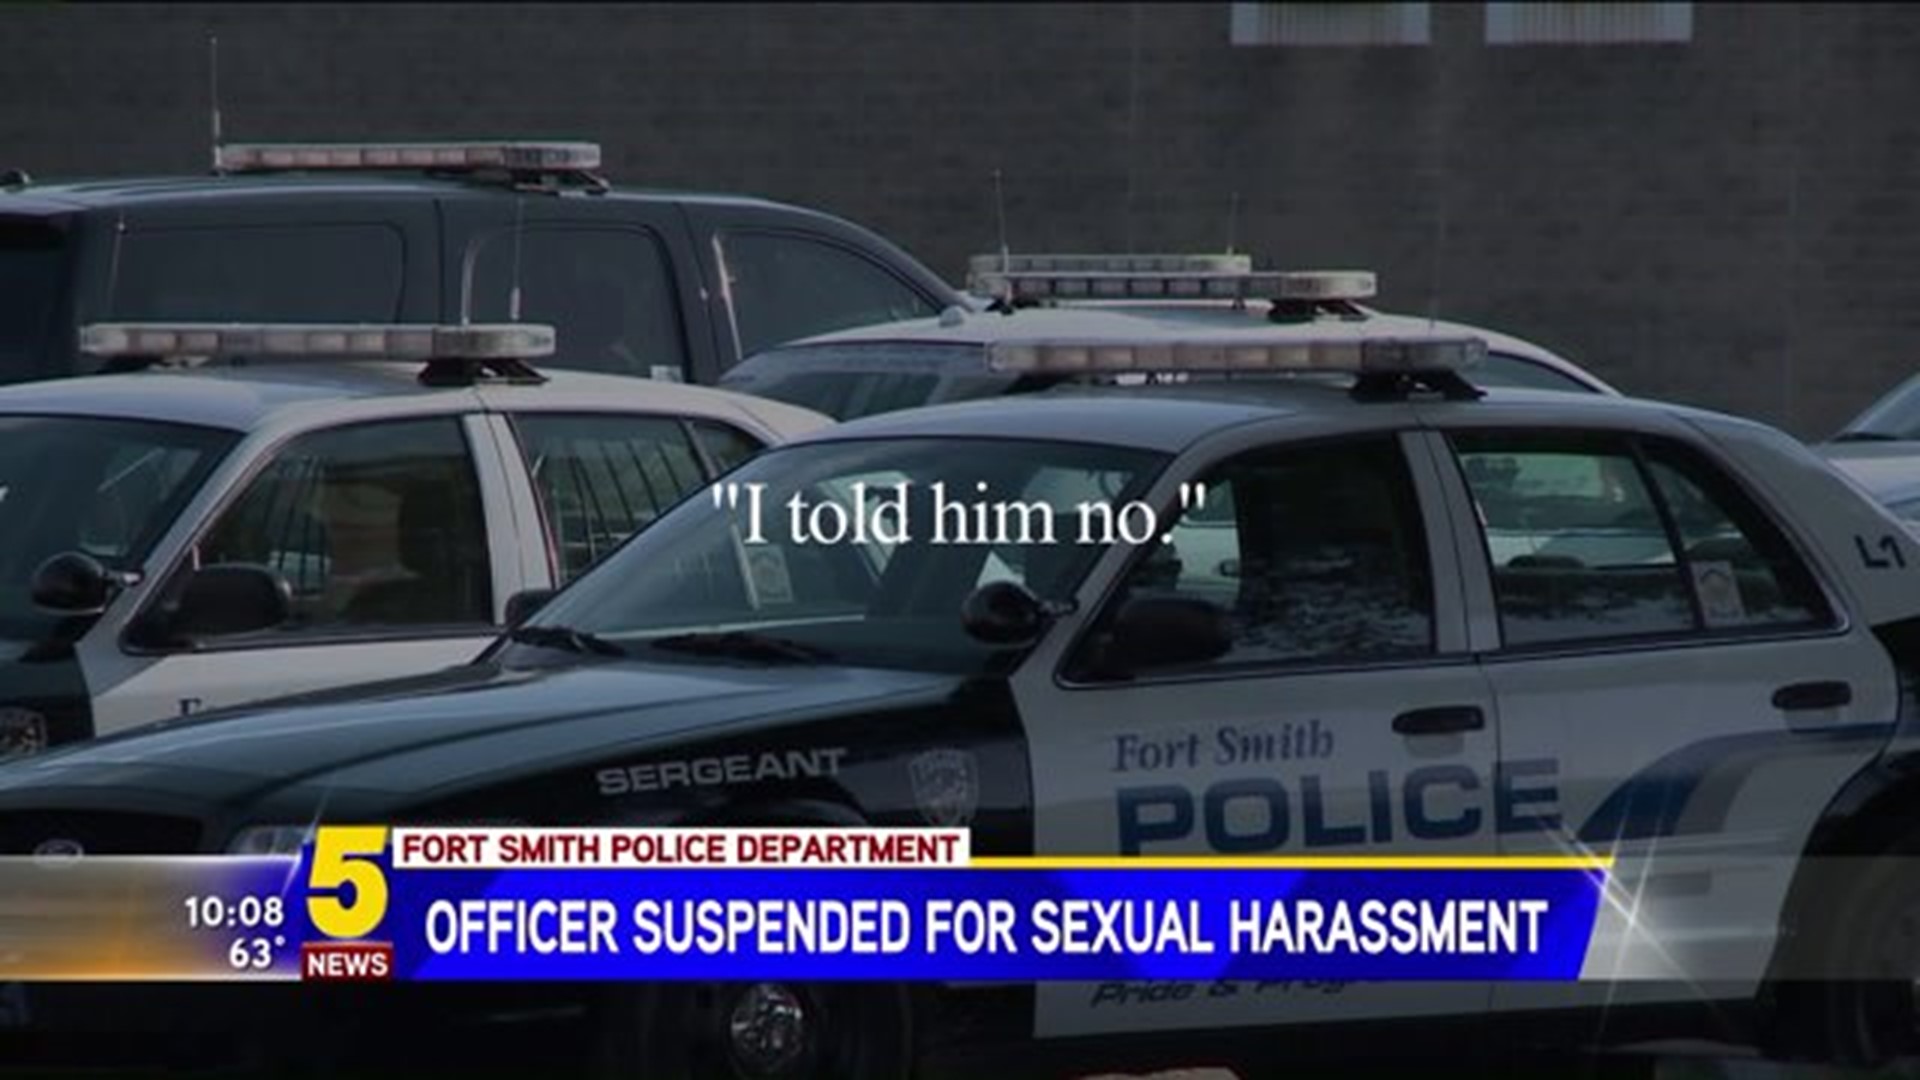 Fort Smith PD Suspension